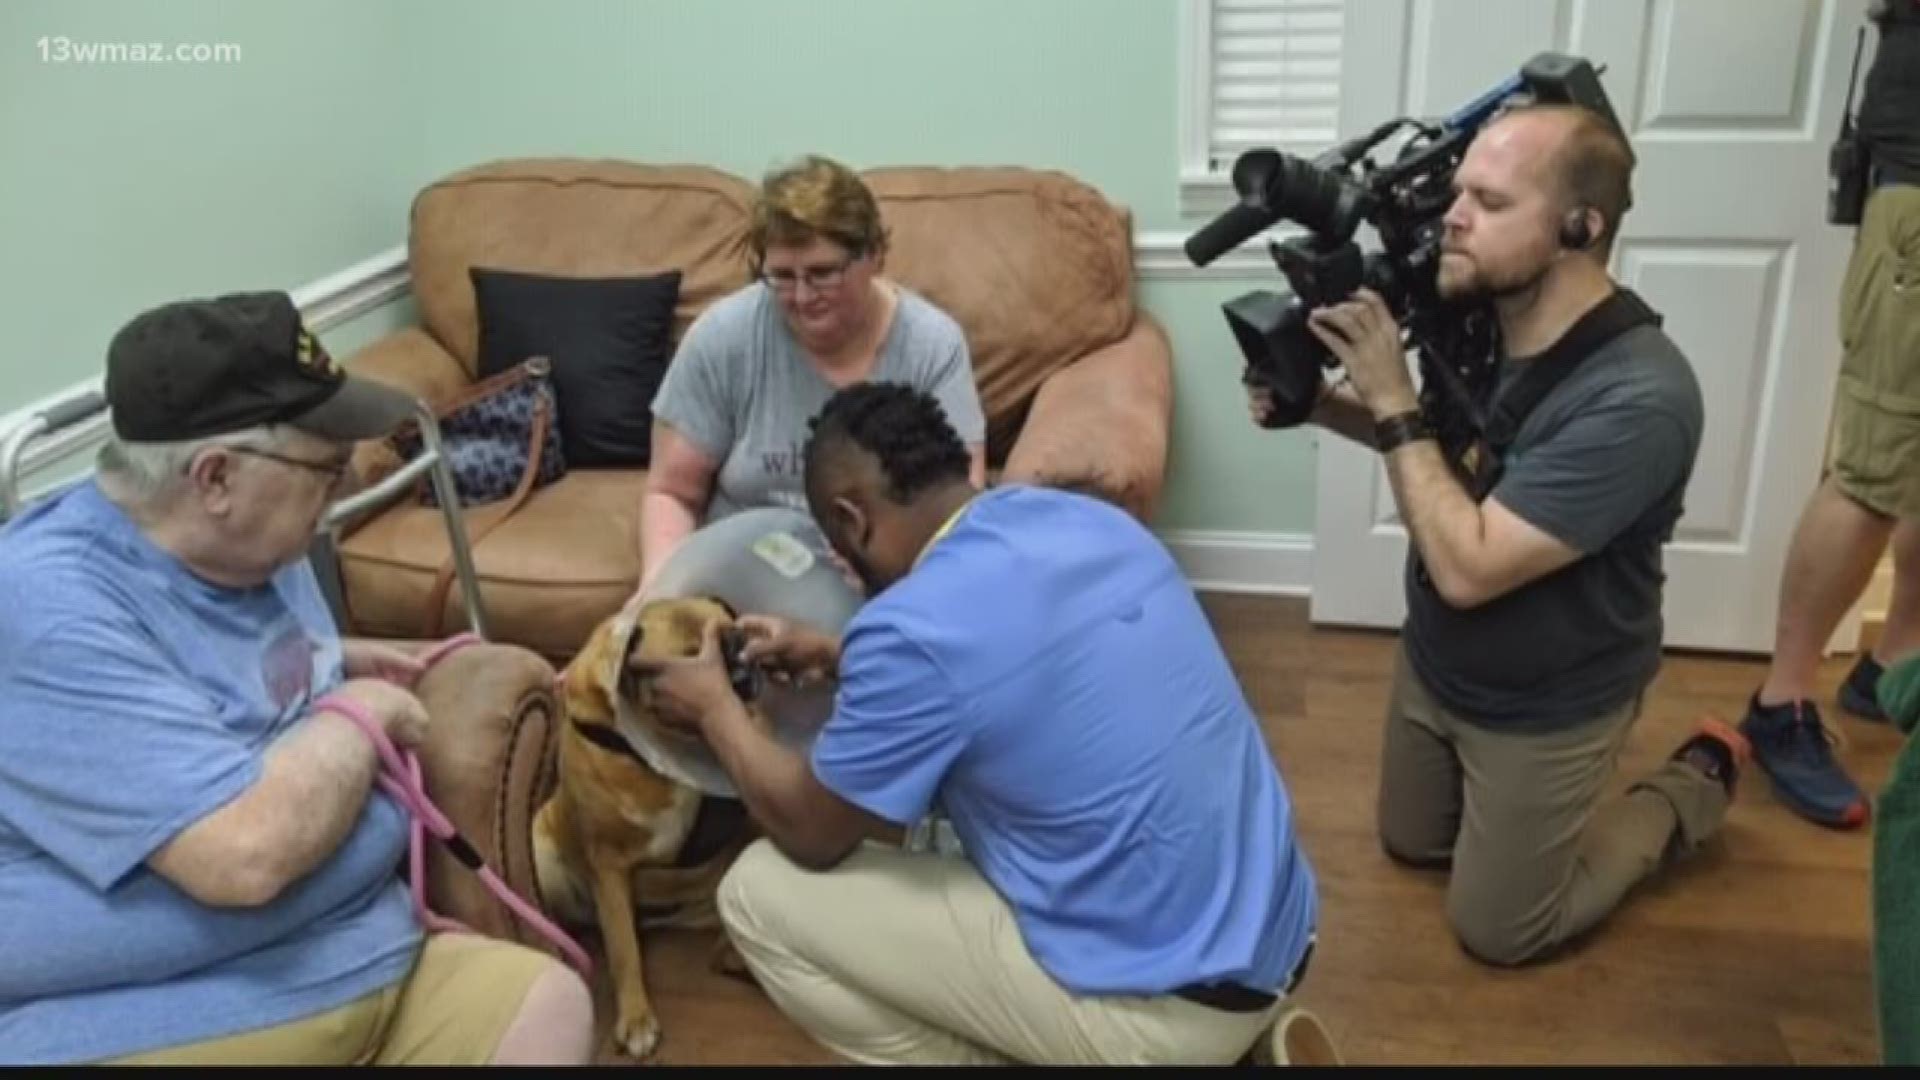 You've seen Dr. Terrence Ferguson and Dr. Vernard Hodges doing pet veterinary tips right here on 13WMAZ. Suzanne Lawler shows you why these guys could become nationwide household names.